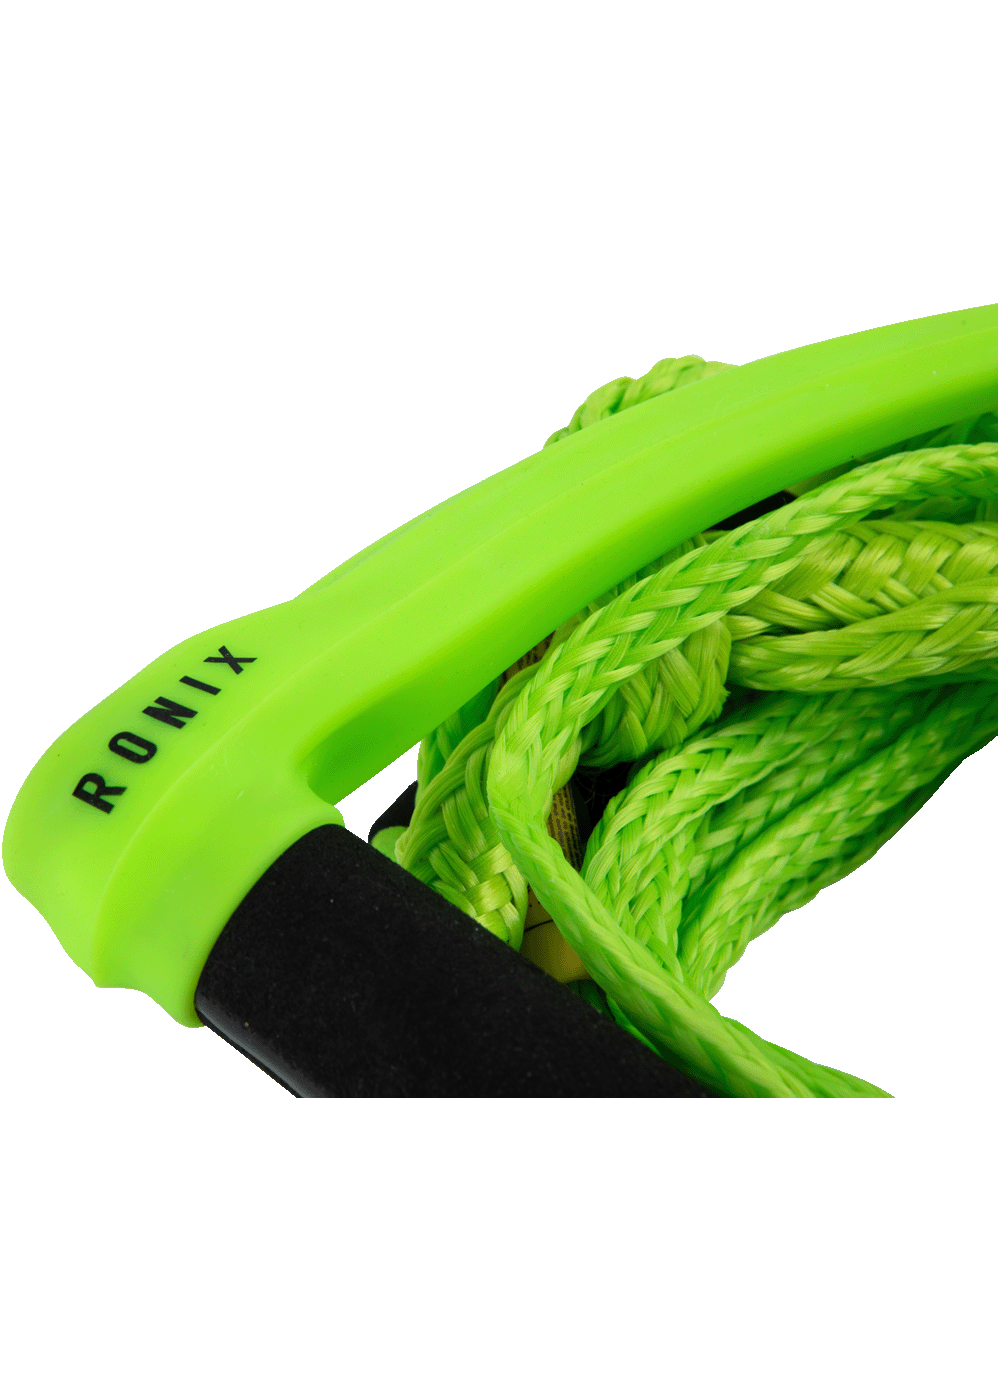 Ronix Silicone Bungee Surf Rope